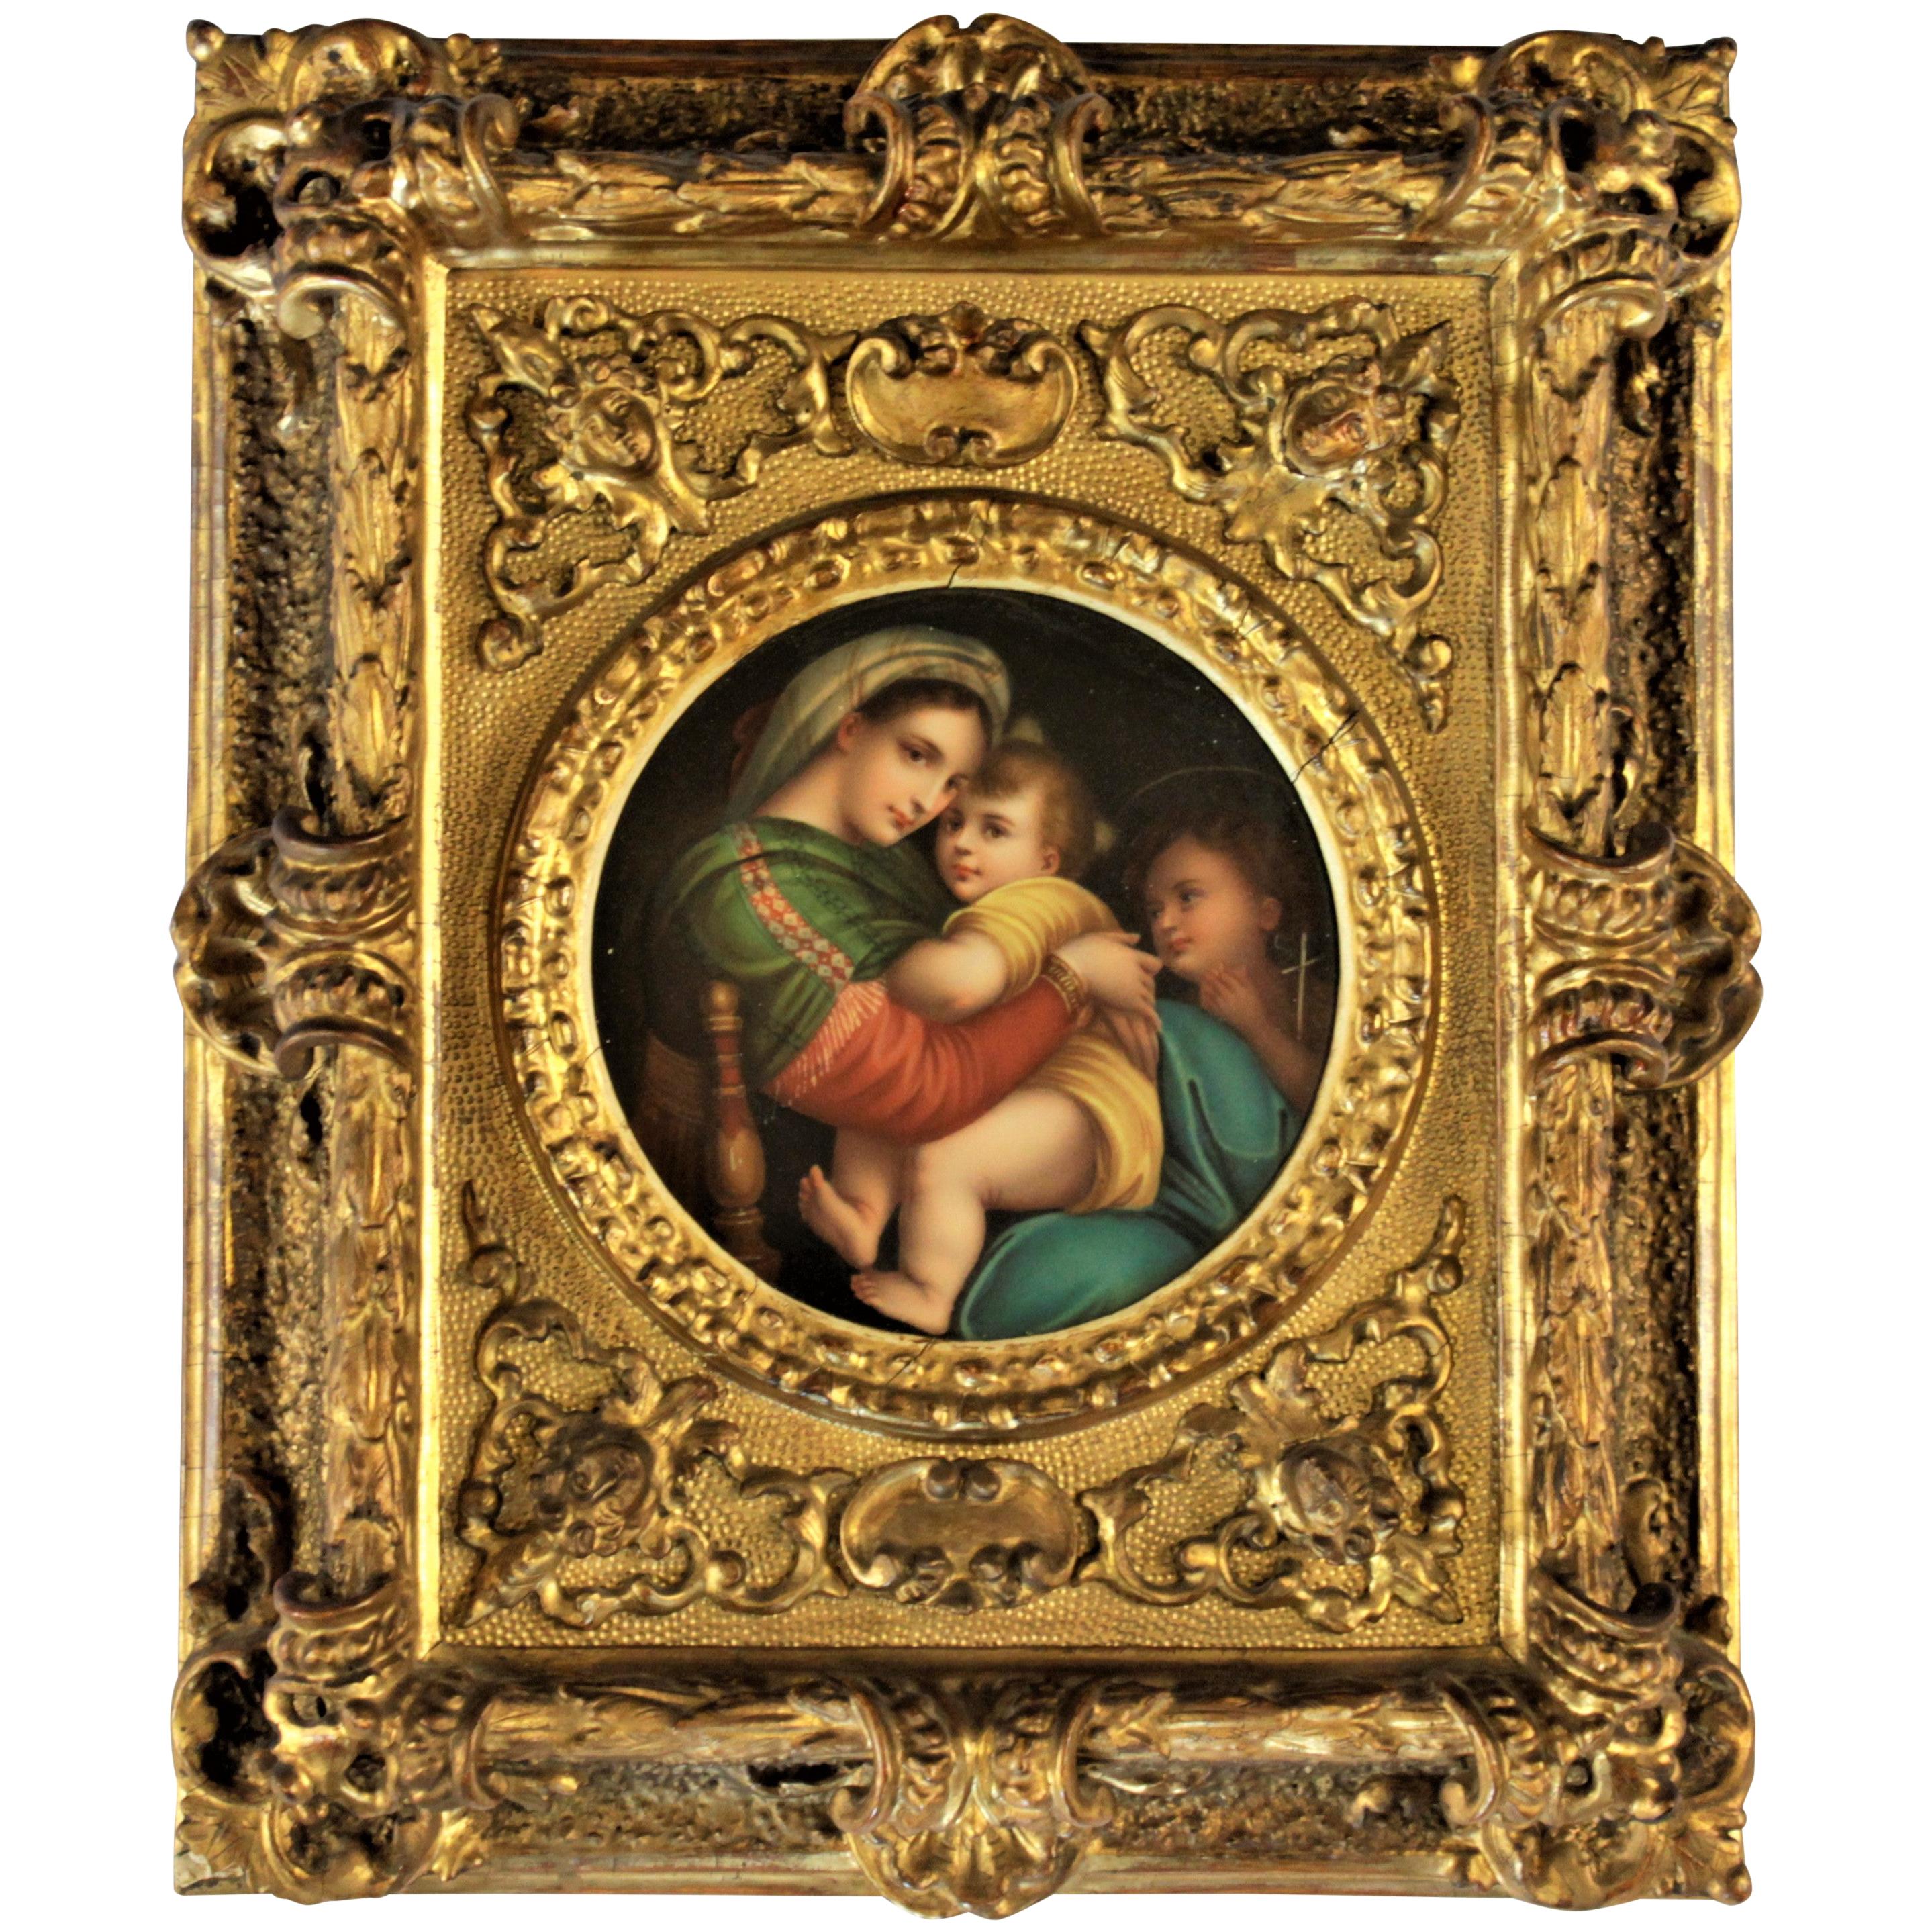 Antique Italian Hand Painted Religious Porcelain Panel with Carved Wood Frame